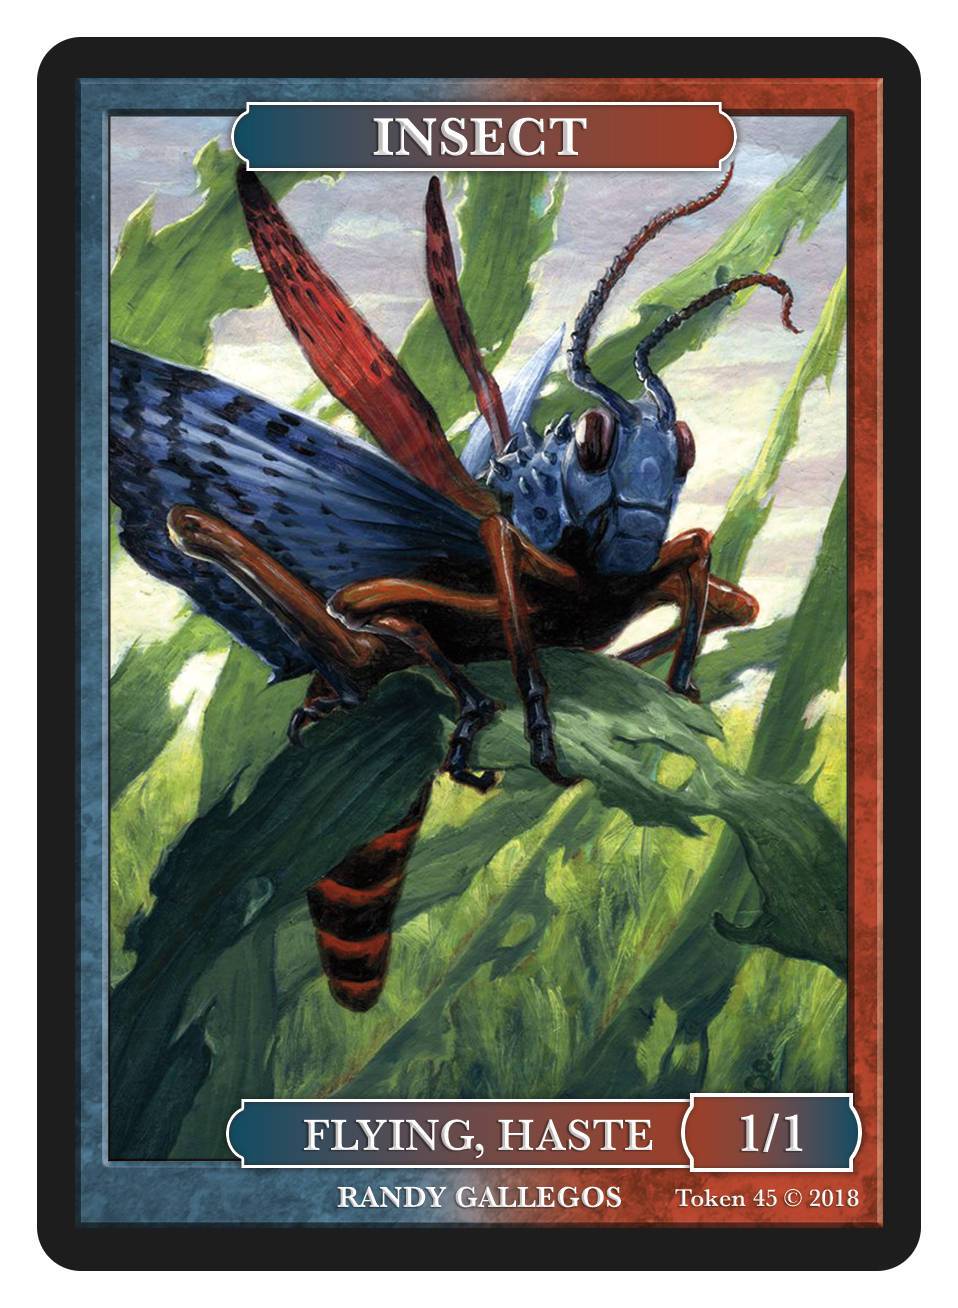 Insect Token (1/1 - Flying, Haste) by Randy Gallegos - Token - Original Magic Art - Accessories for Magic the Gathering and other card games